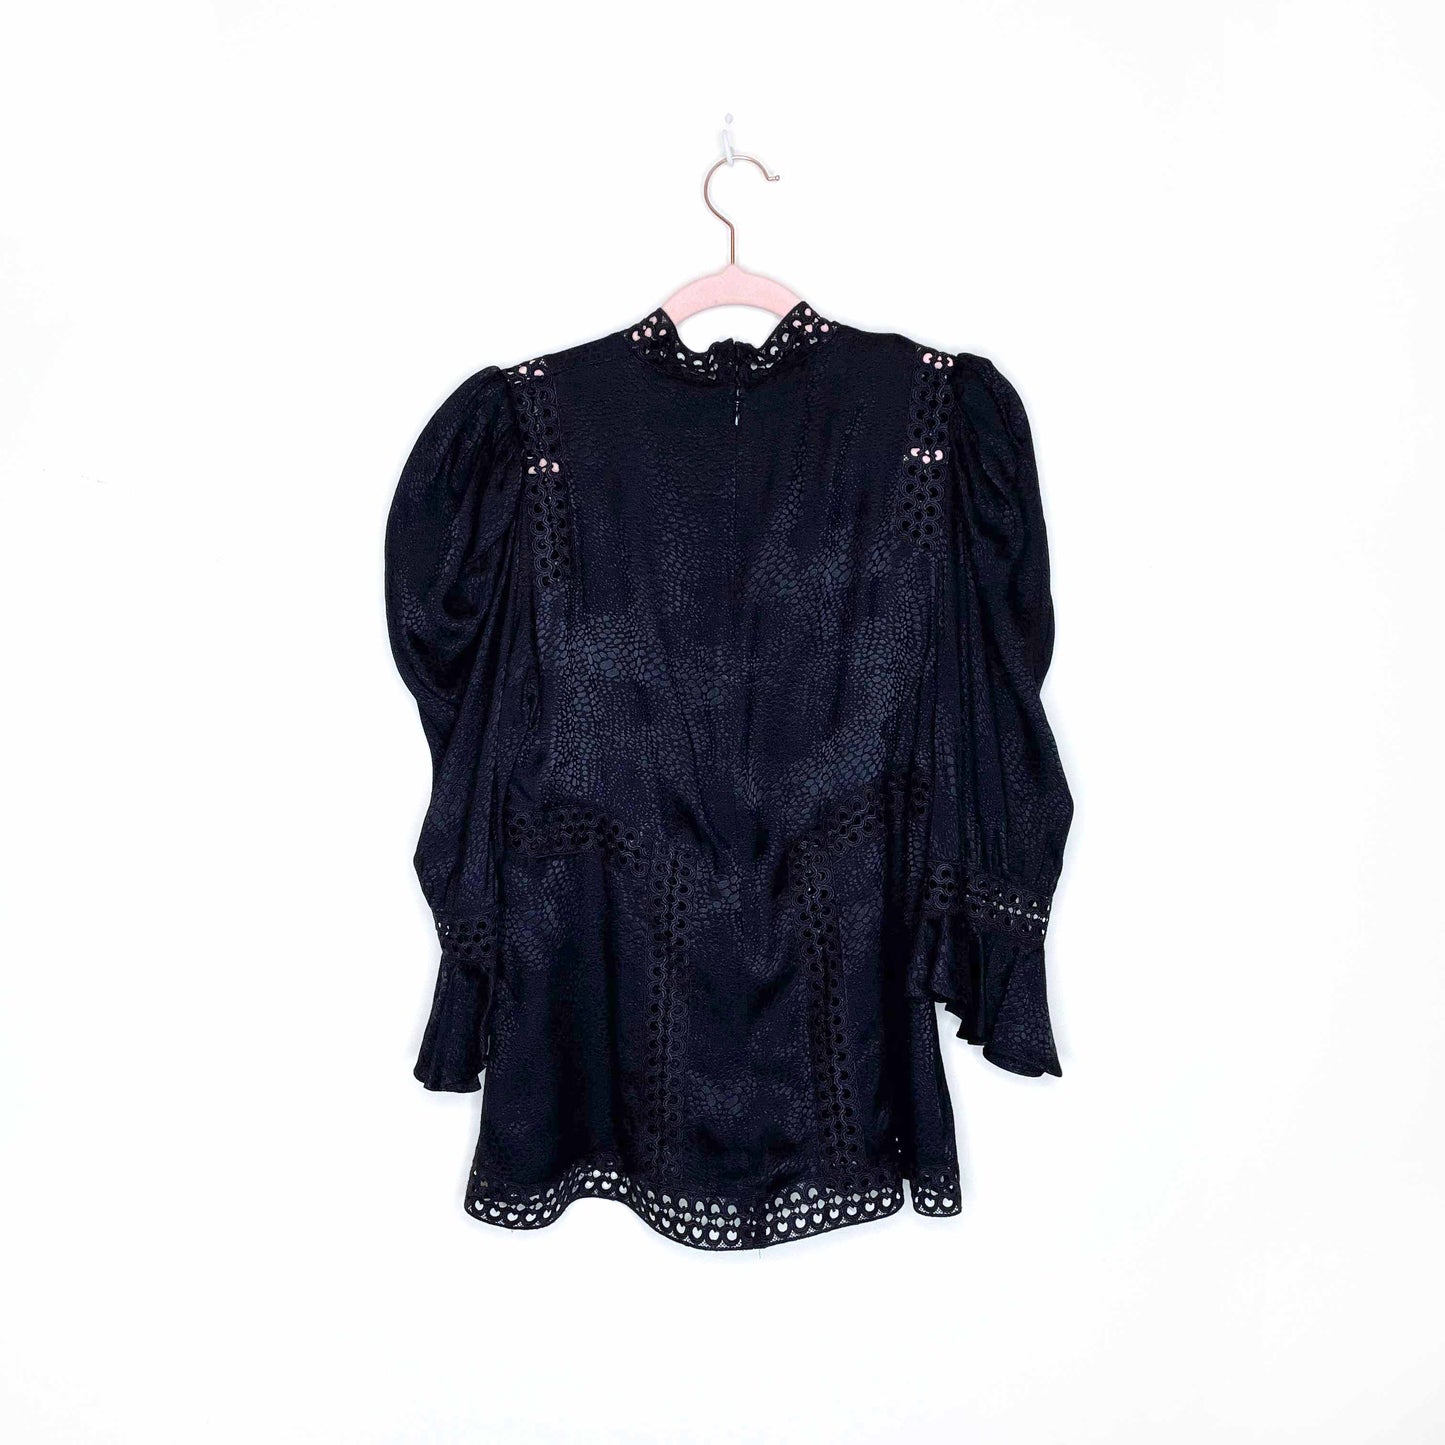 the kooples black high neck blouse with lace inset - size medium